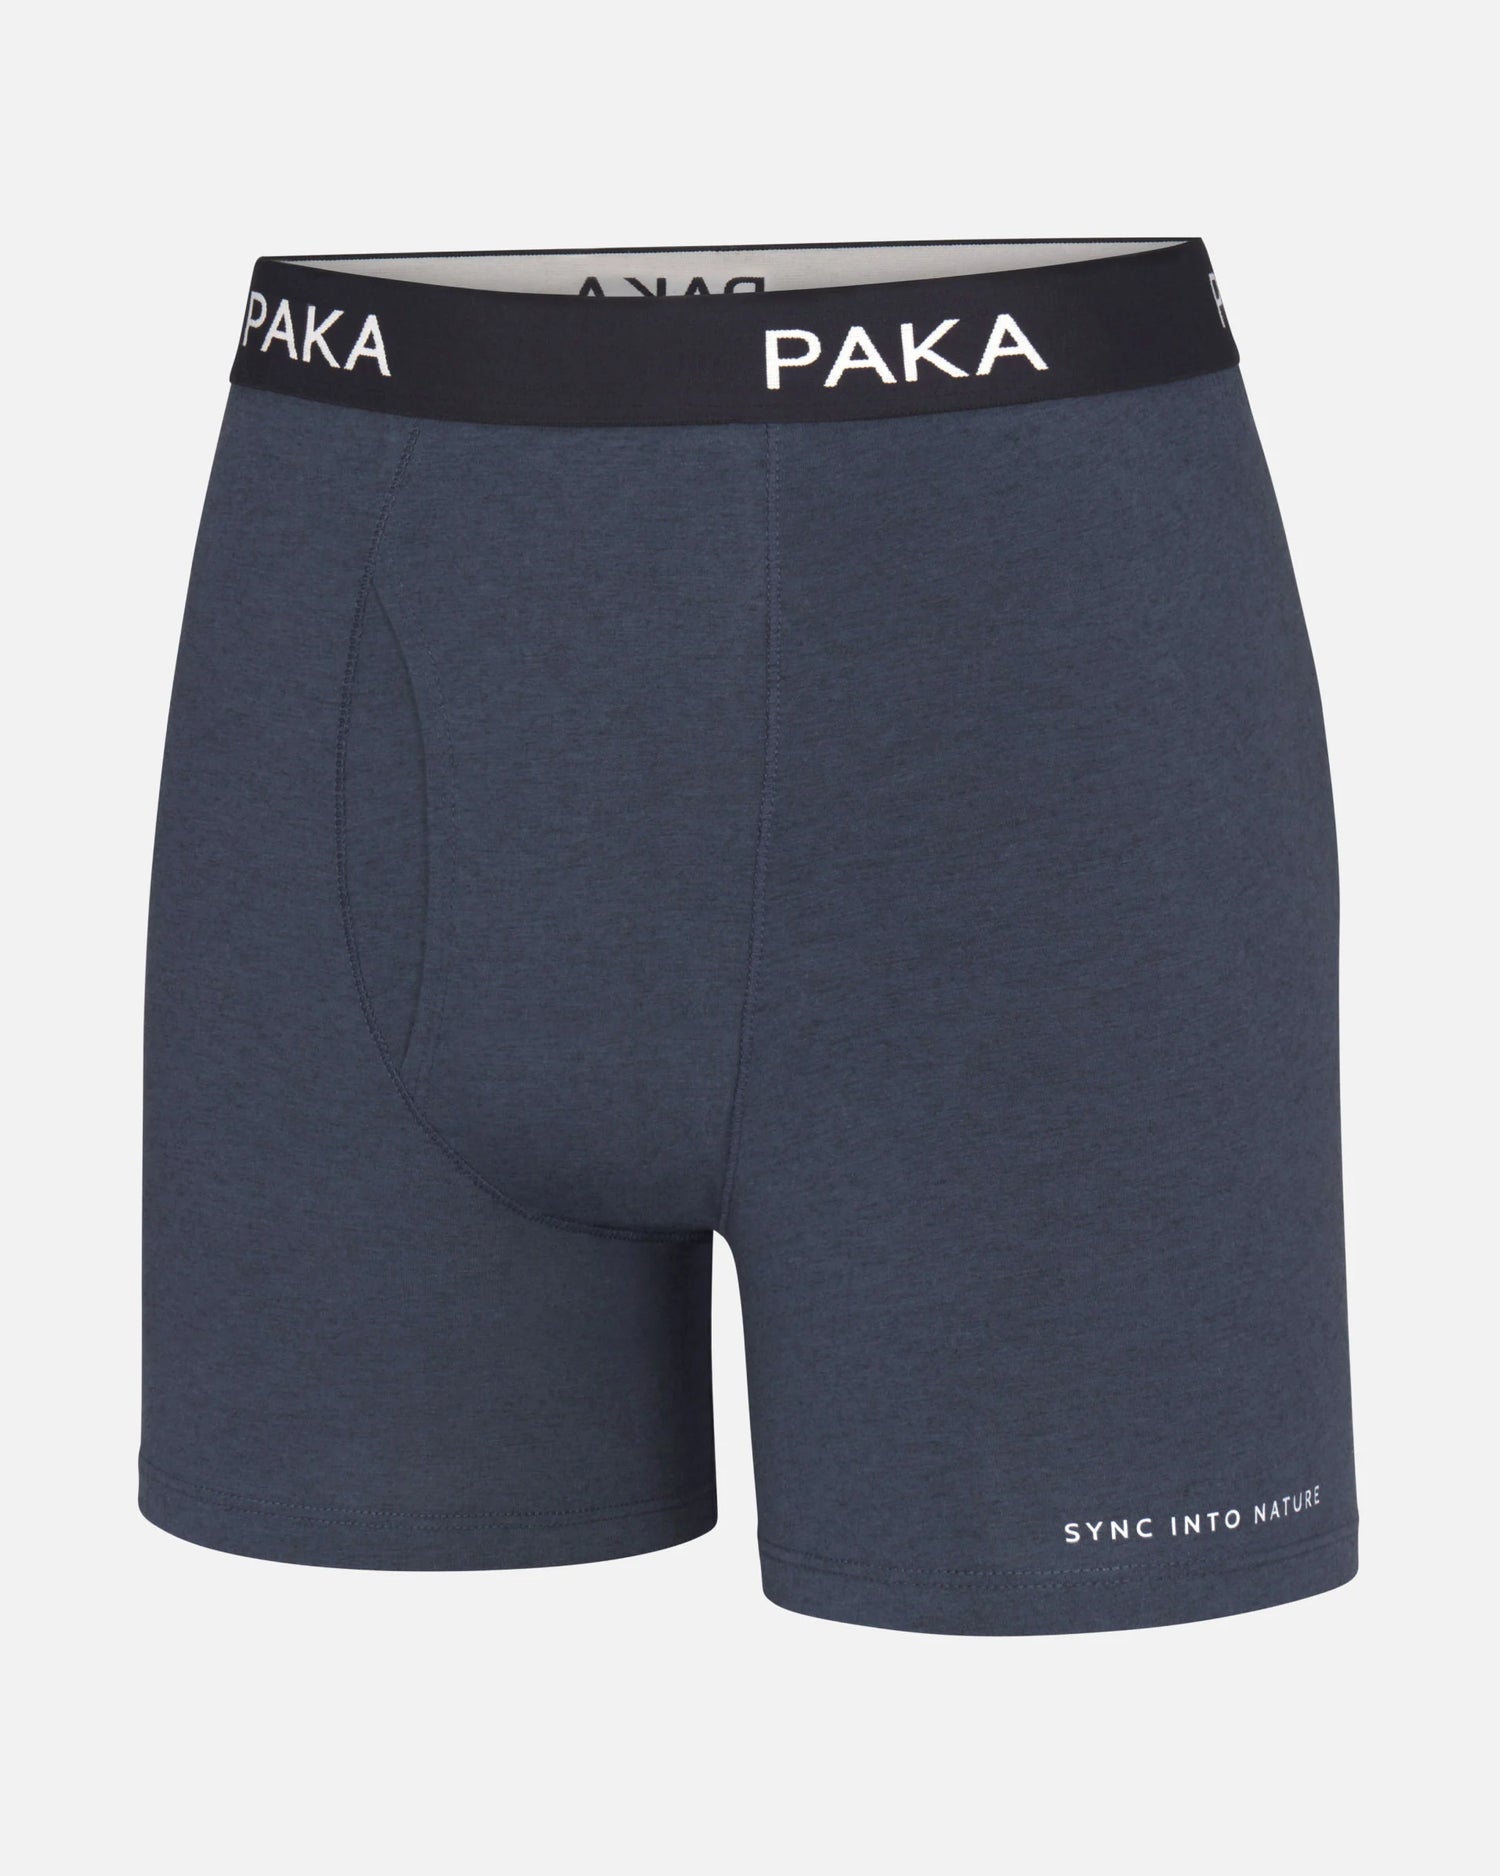 Men's Alpaca Wool Boxer Briefs: 160 Ultralight | Arms of Andes